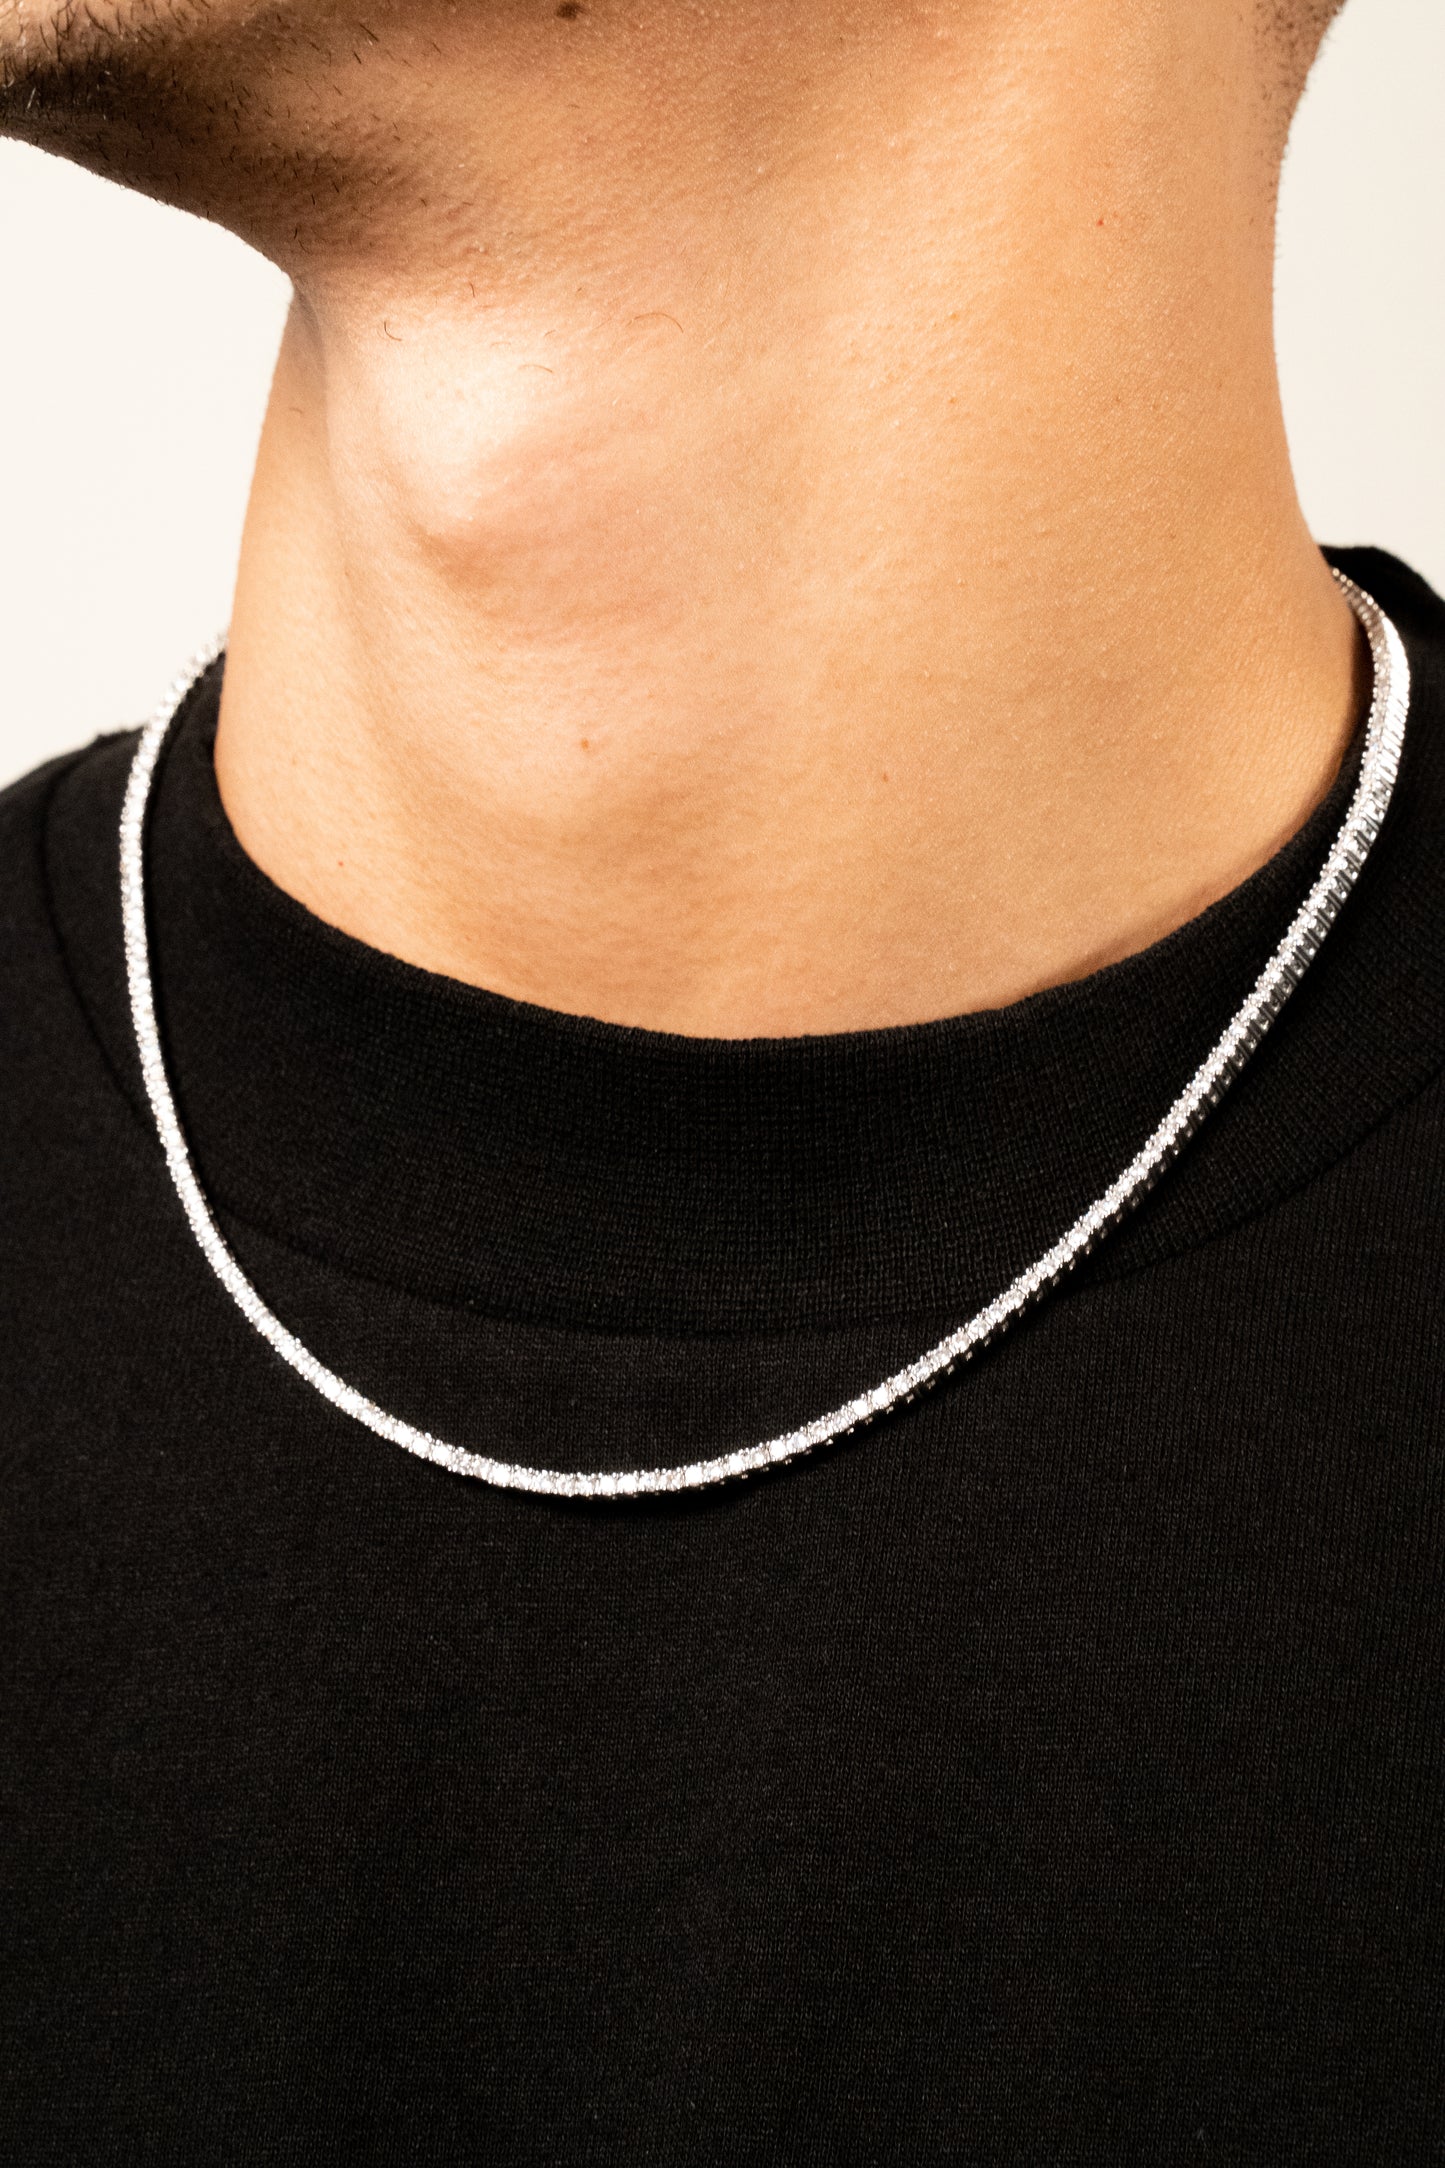 Heirloom Tennis Necklace in White Gold - 2mm